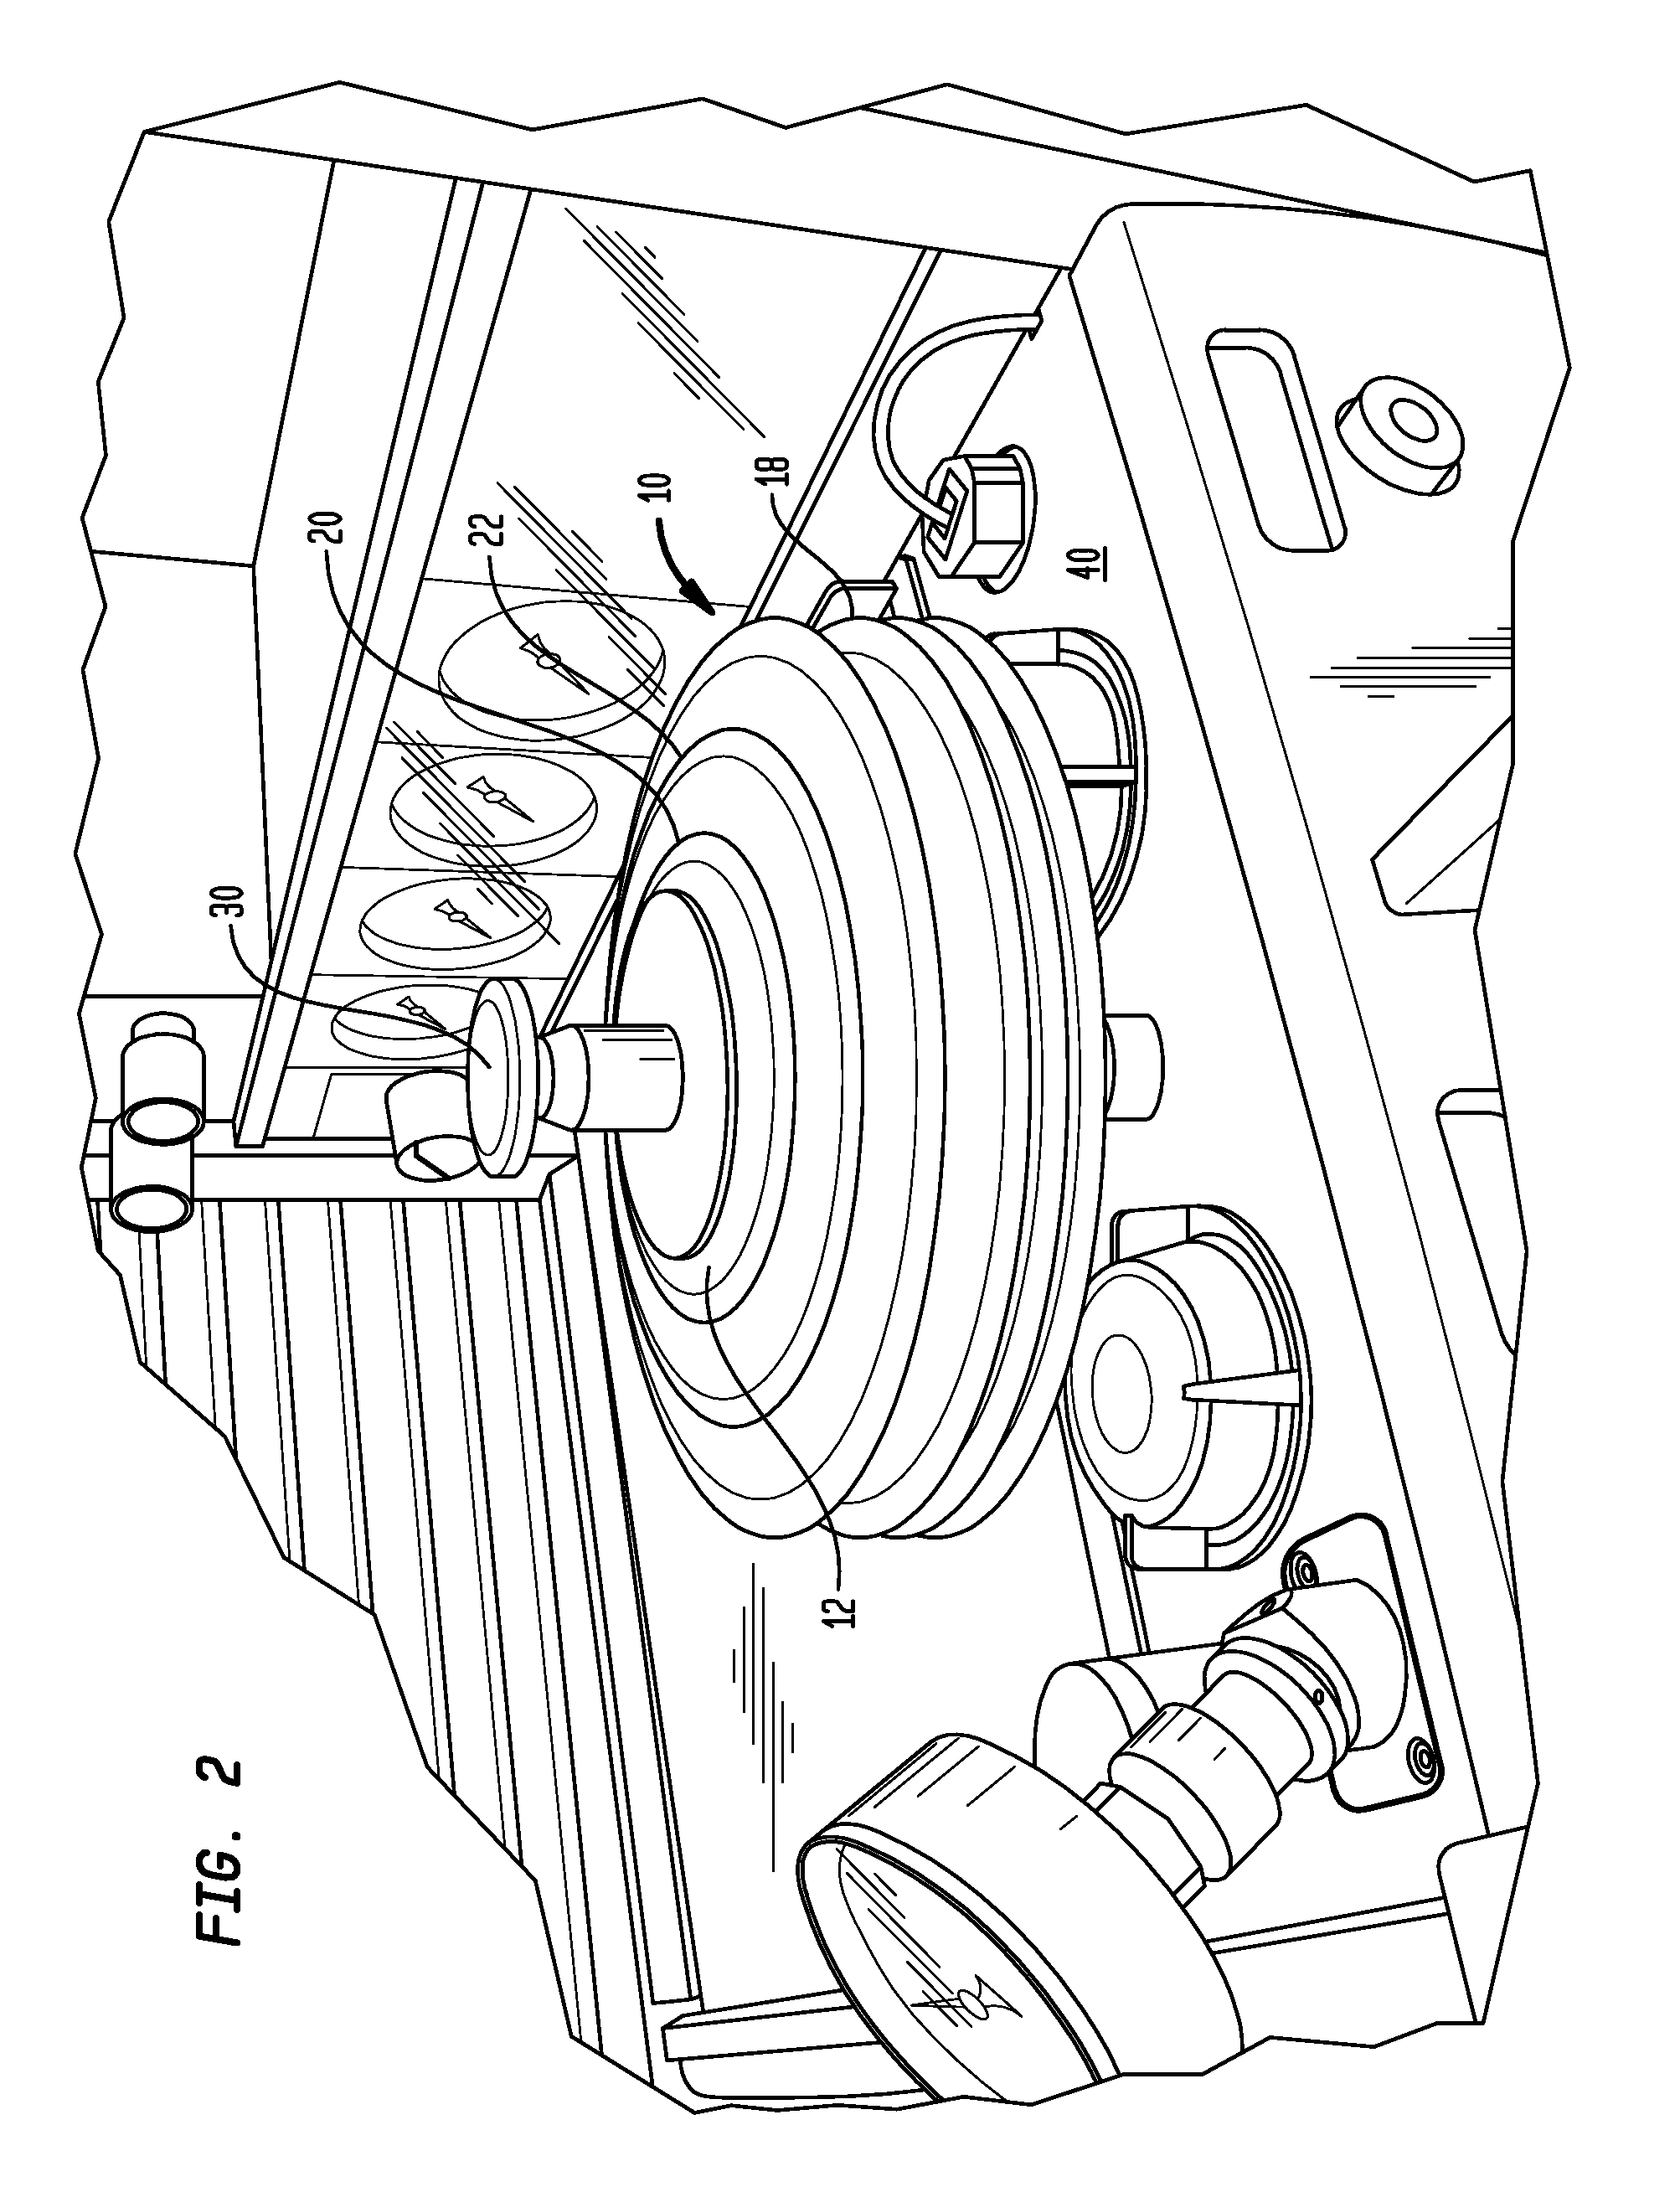 Ventilating element, system, and methods